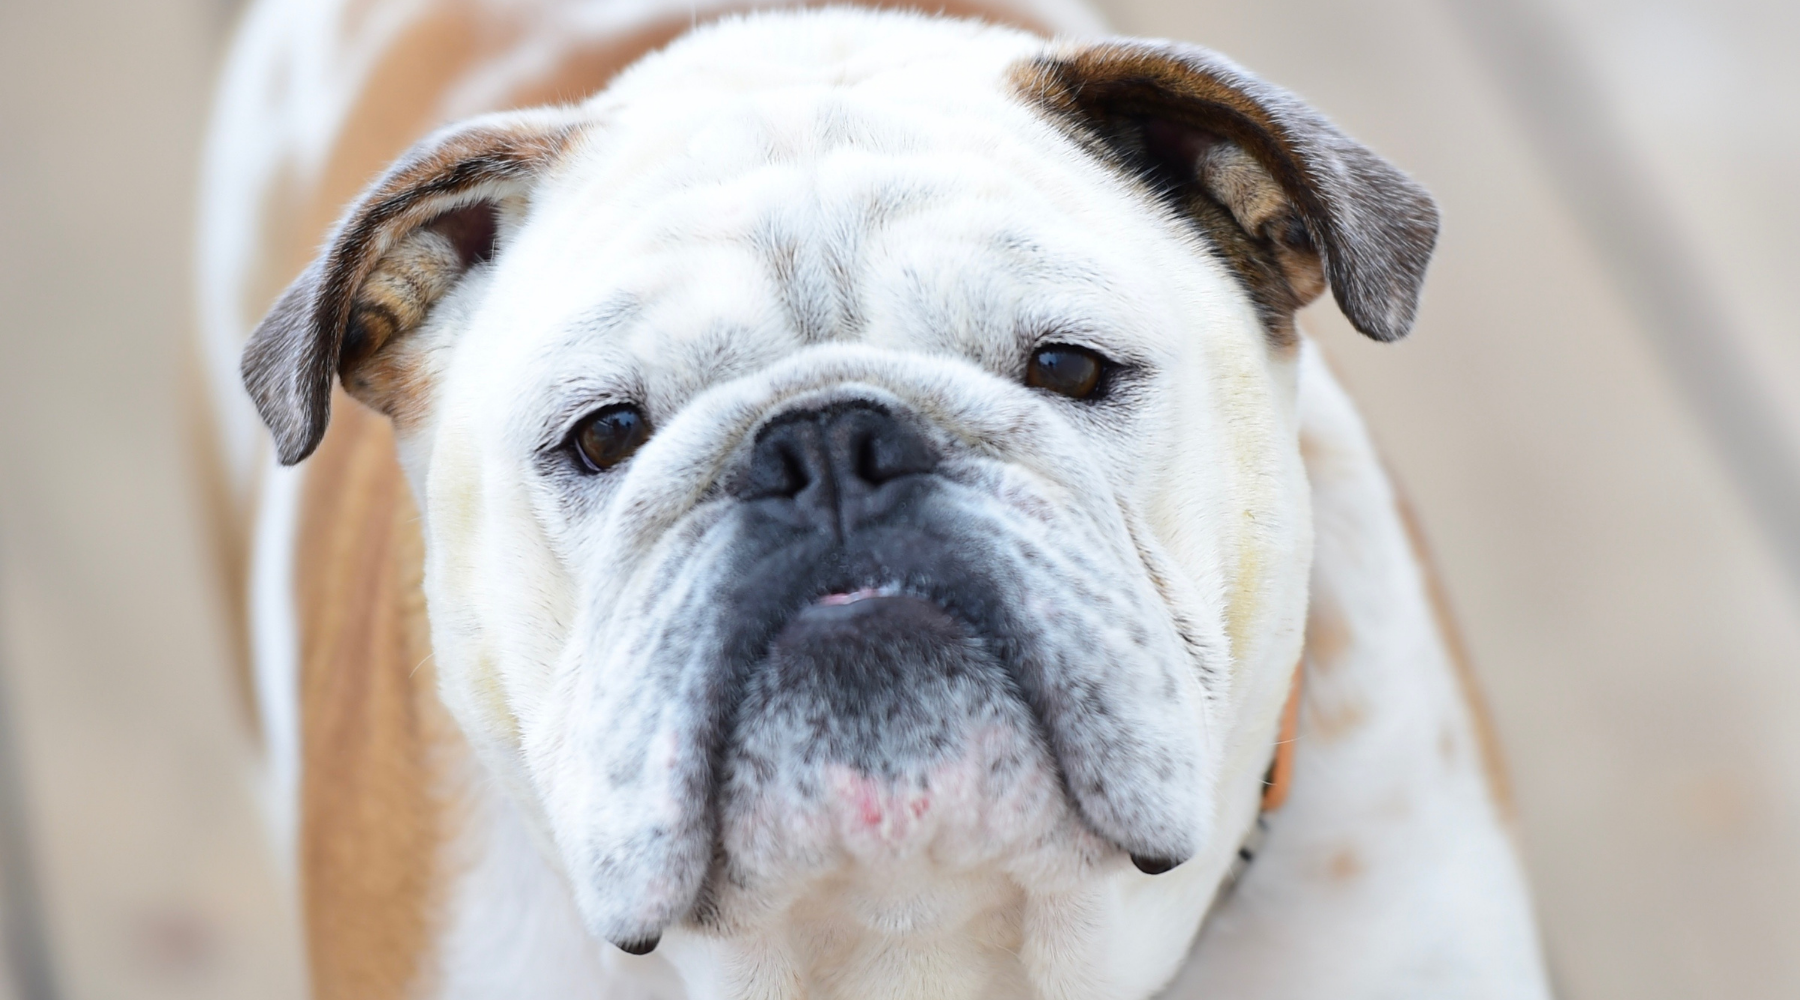 Why Do Bulldogs Have Wrinkles? – Squishface